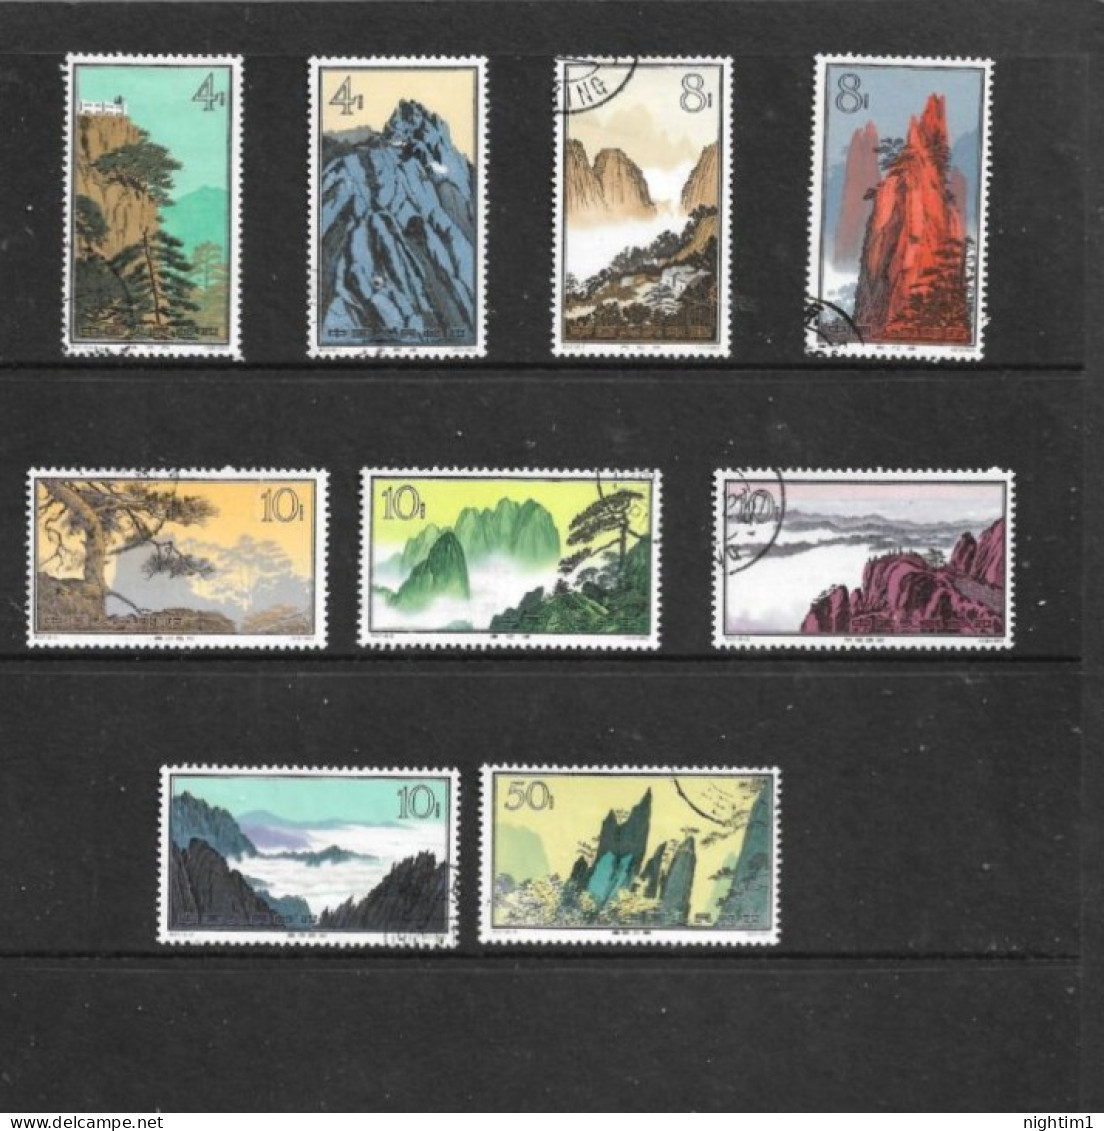 CHINA COLLECTION. HWANGSHAN LANDSCAPES. USED. - Gebraucht